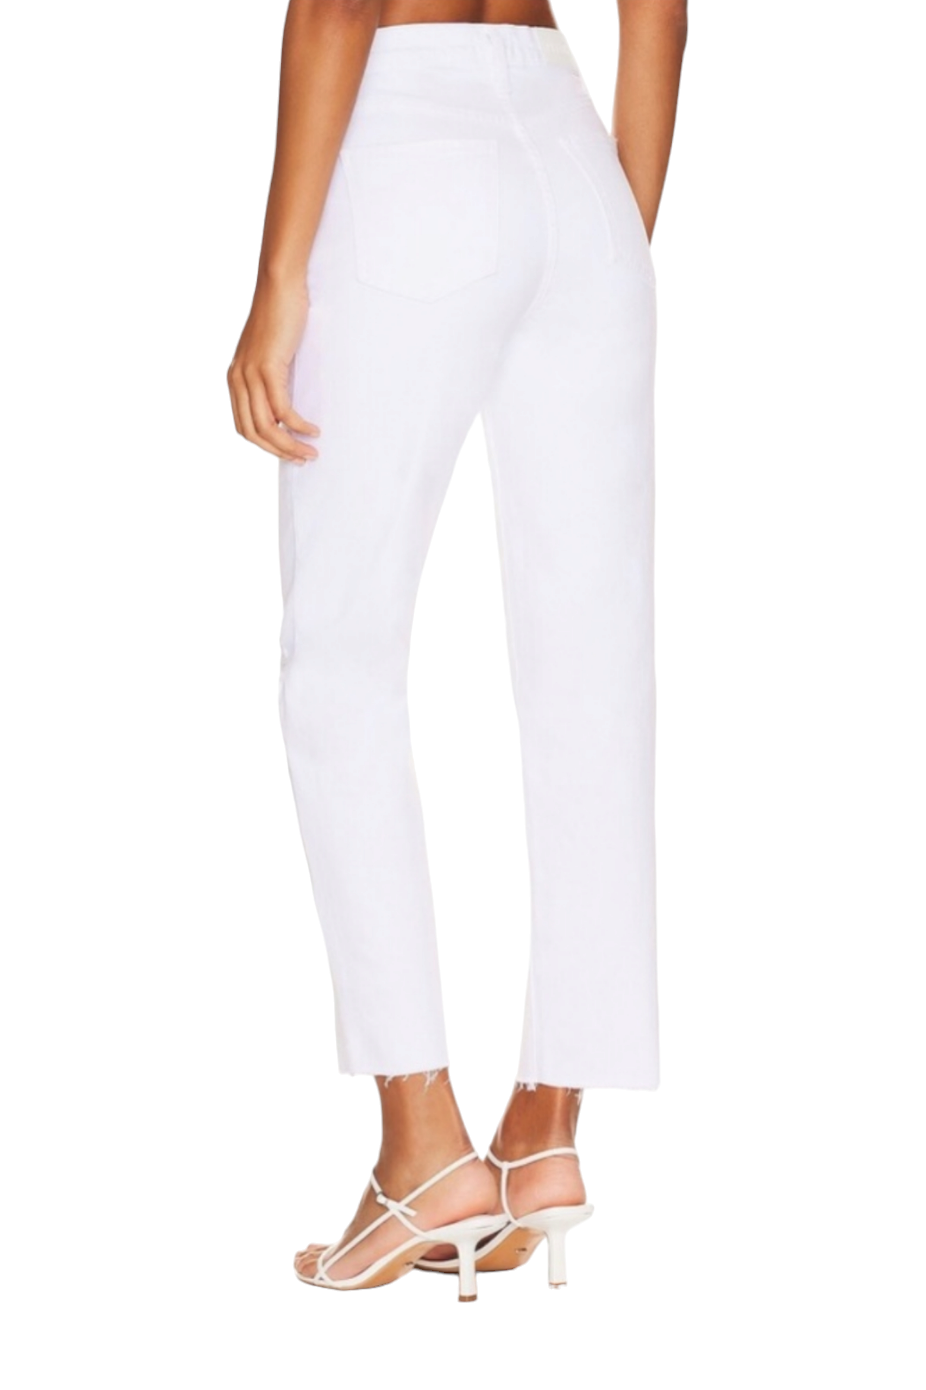 Pistola Charlie White High Rise Classic Straight Blanca Vintage Jeans